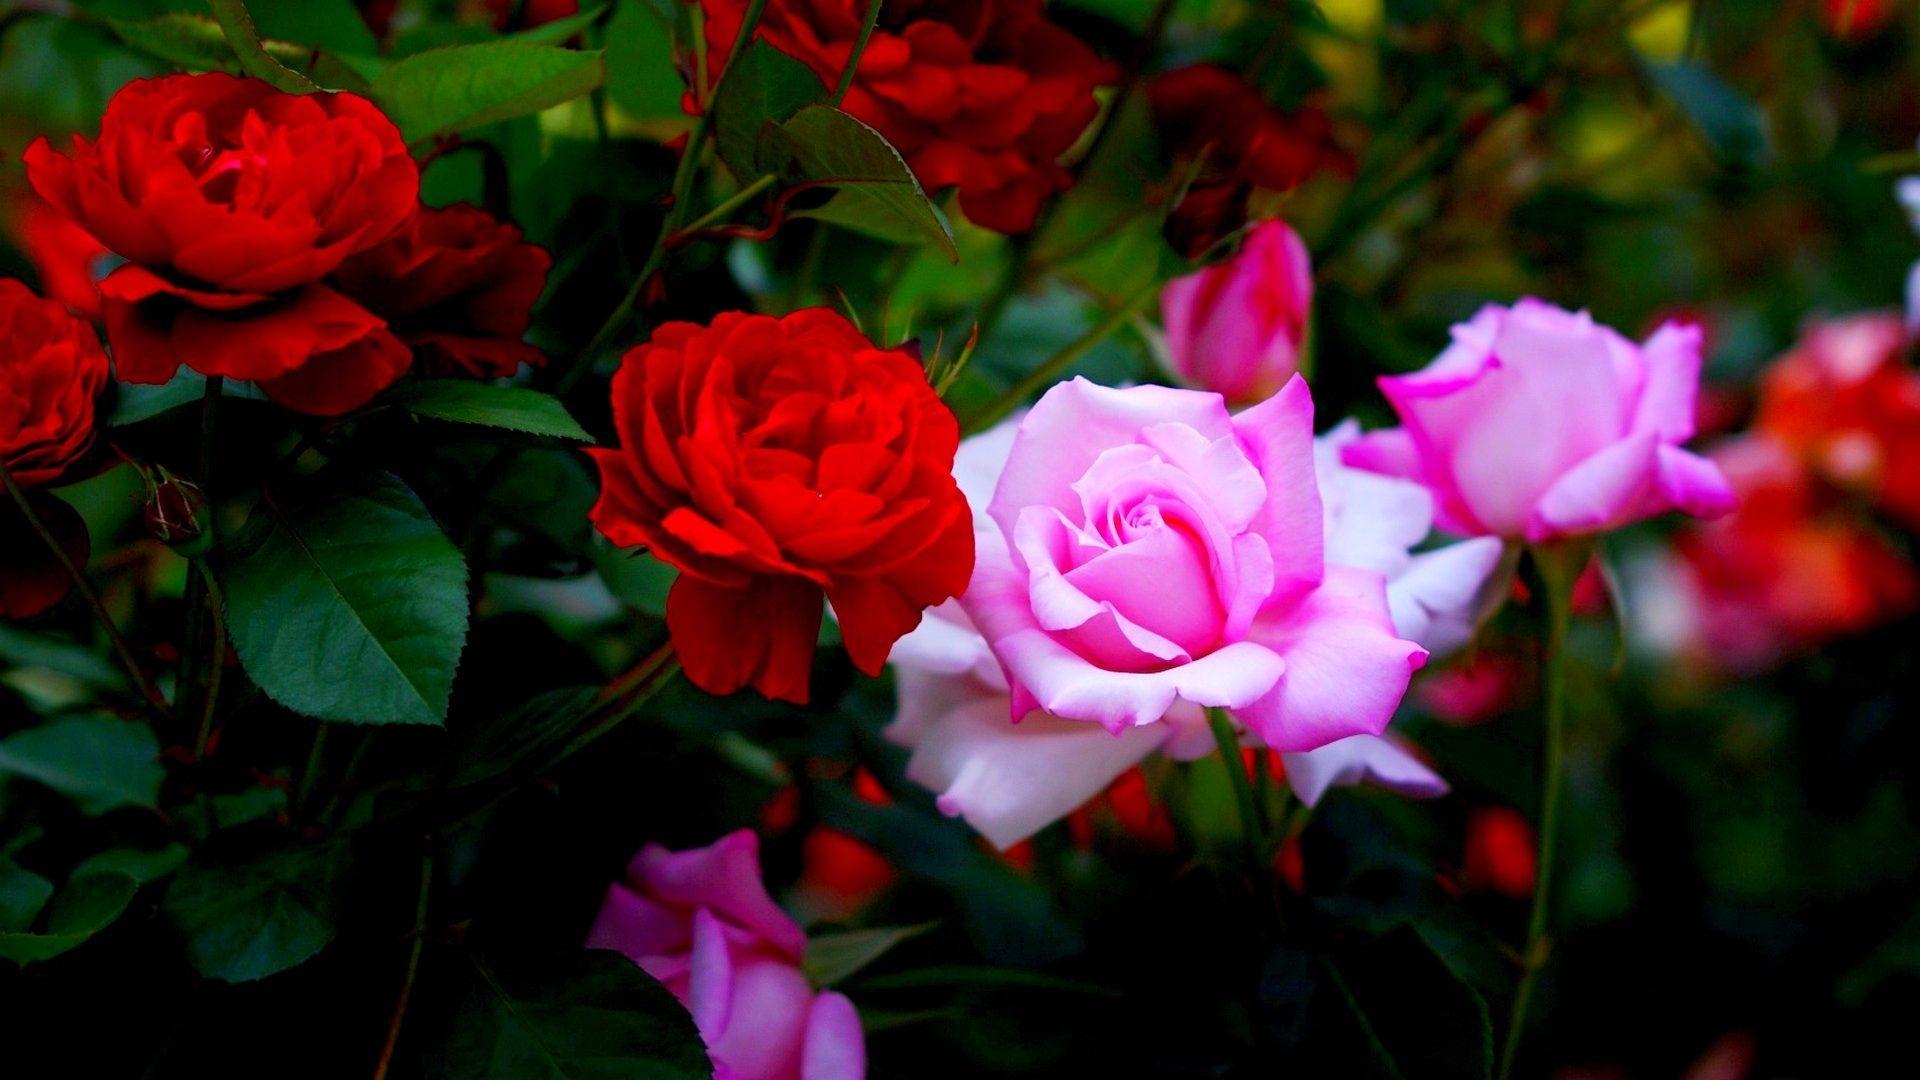 Desktop Flowers Rose Garden Pink Roses Nature Red Full HD P With